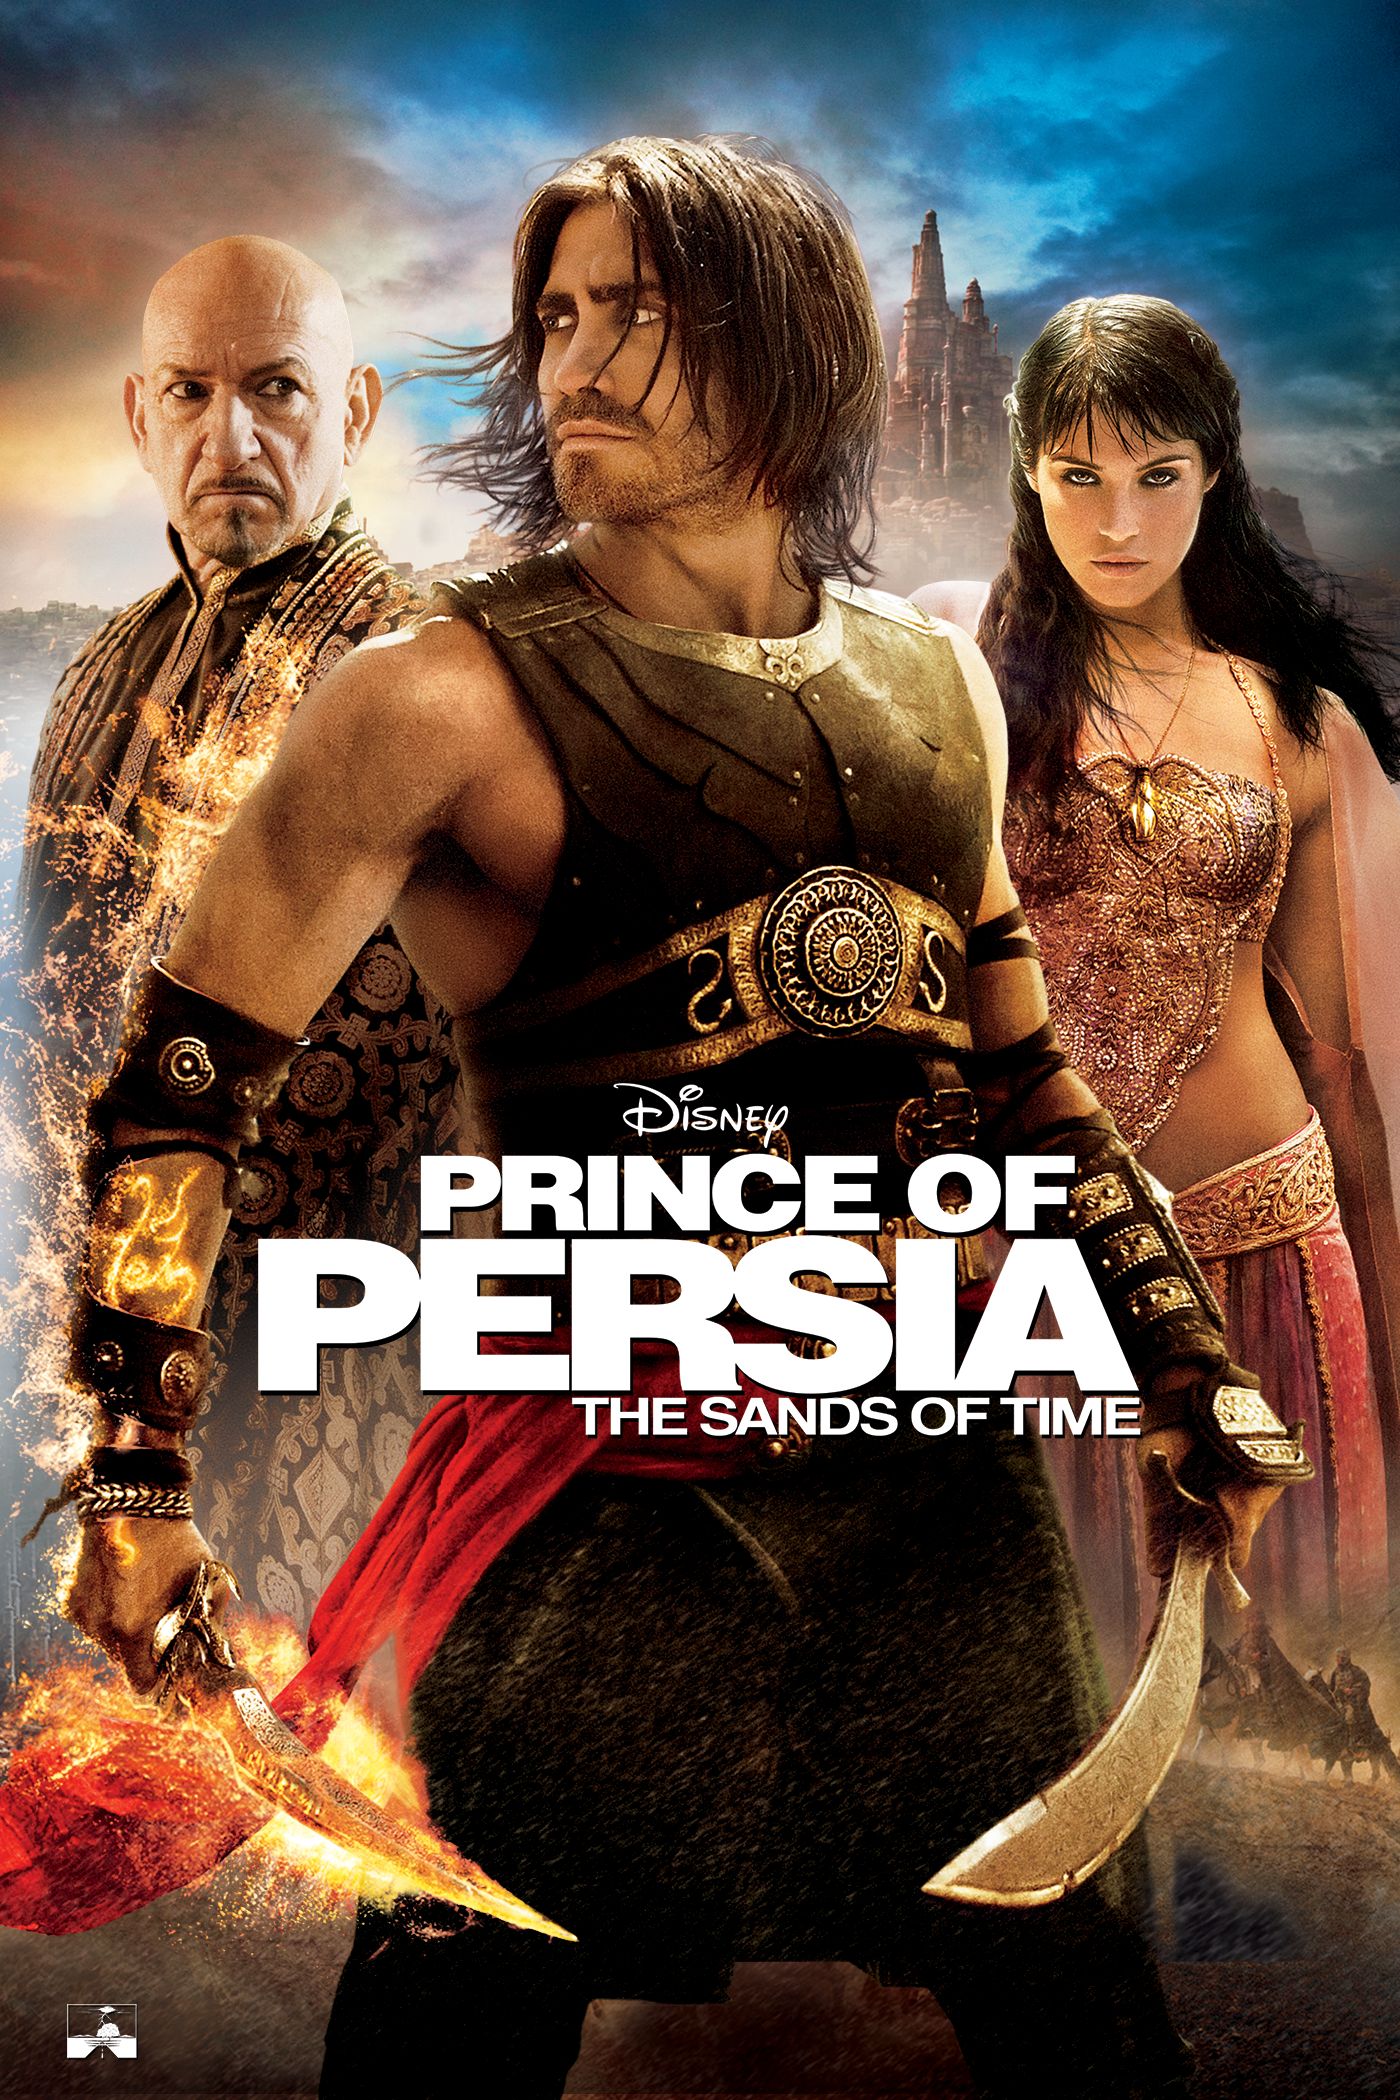 Download Prince Of Persia The Sands Of Time 2010 Full Hd Quality